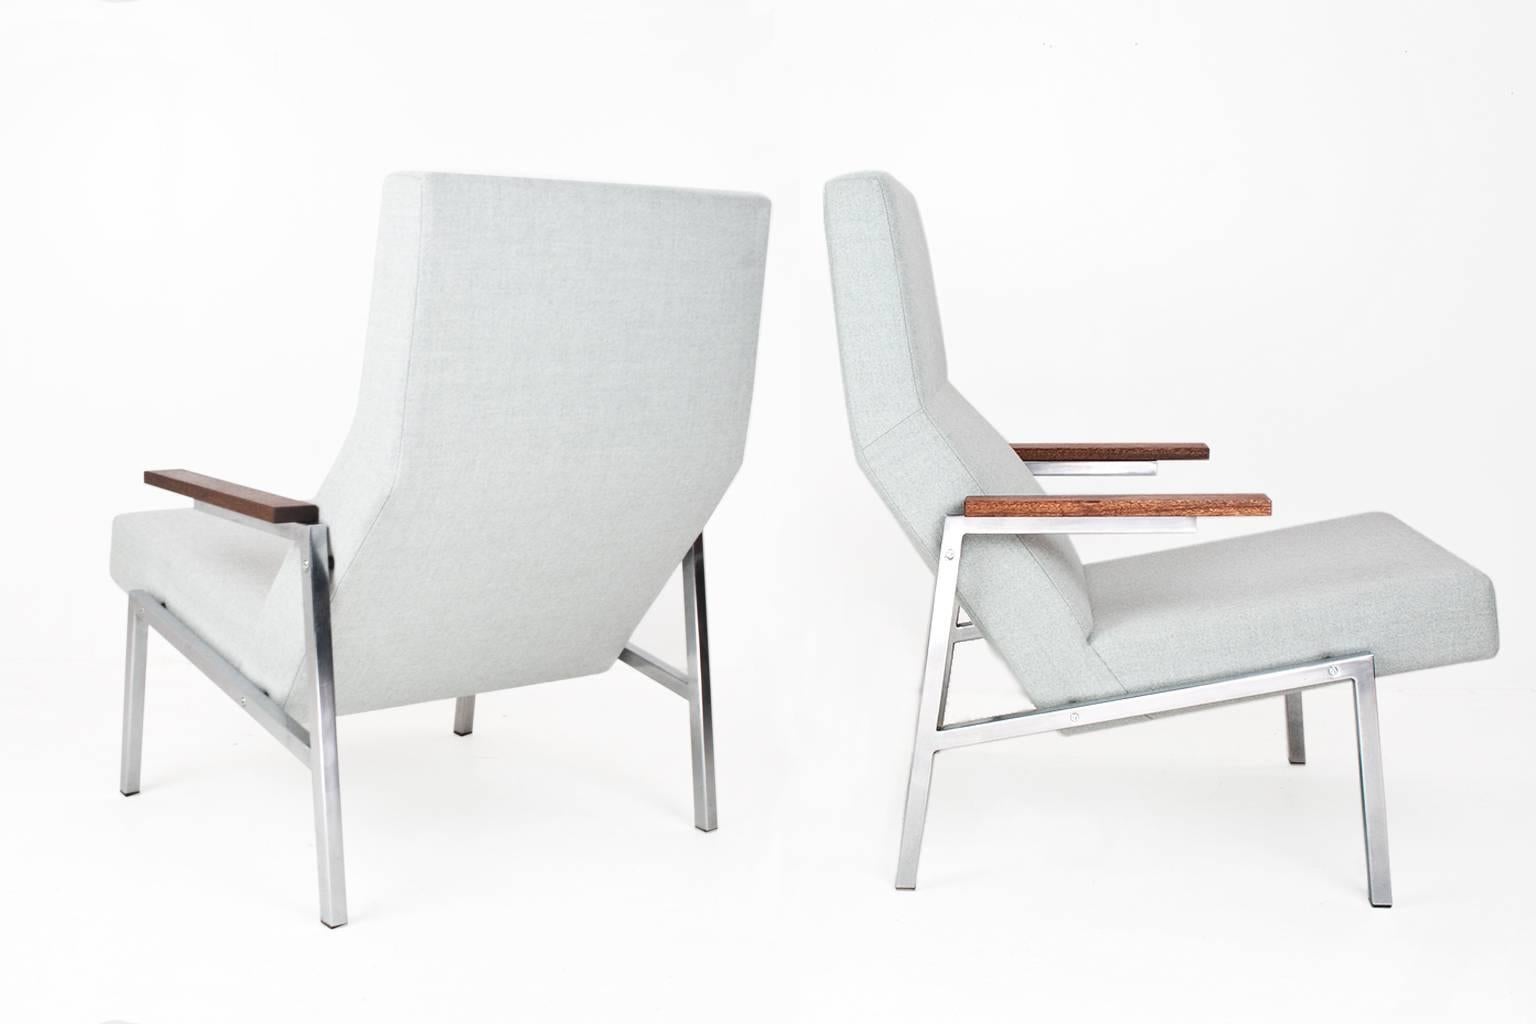 Large and new upholstered Mid-Century Dutch modern easy chairs, model SZ67 by Martin Visser for ’t Spectrum, collection 1964-1969. New foam and upholstered in a beautiful light grey Ploegwool (#08). Original chromed metal frame and teak armrests.